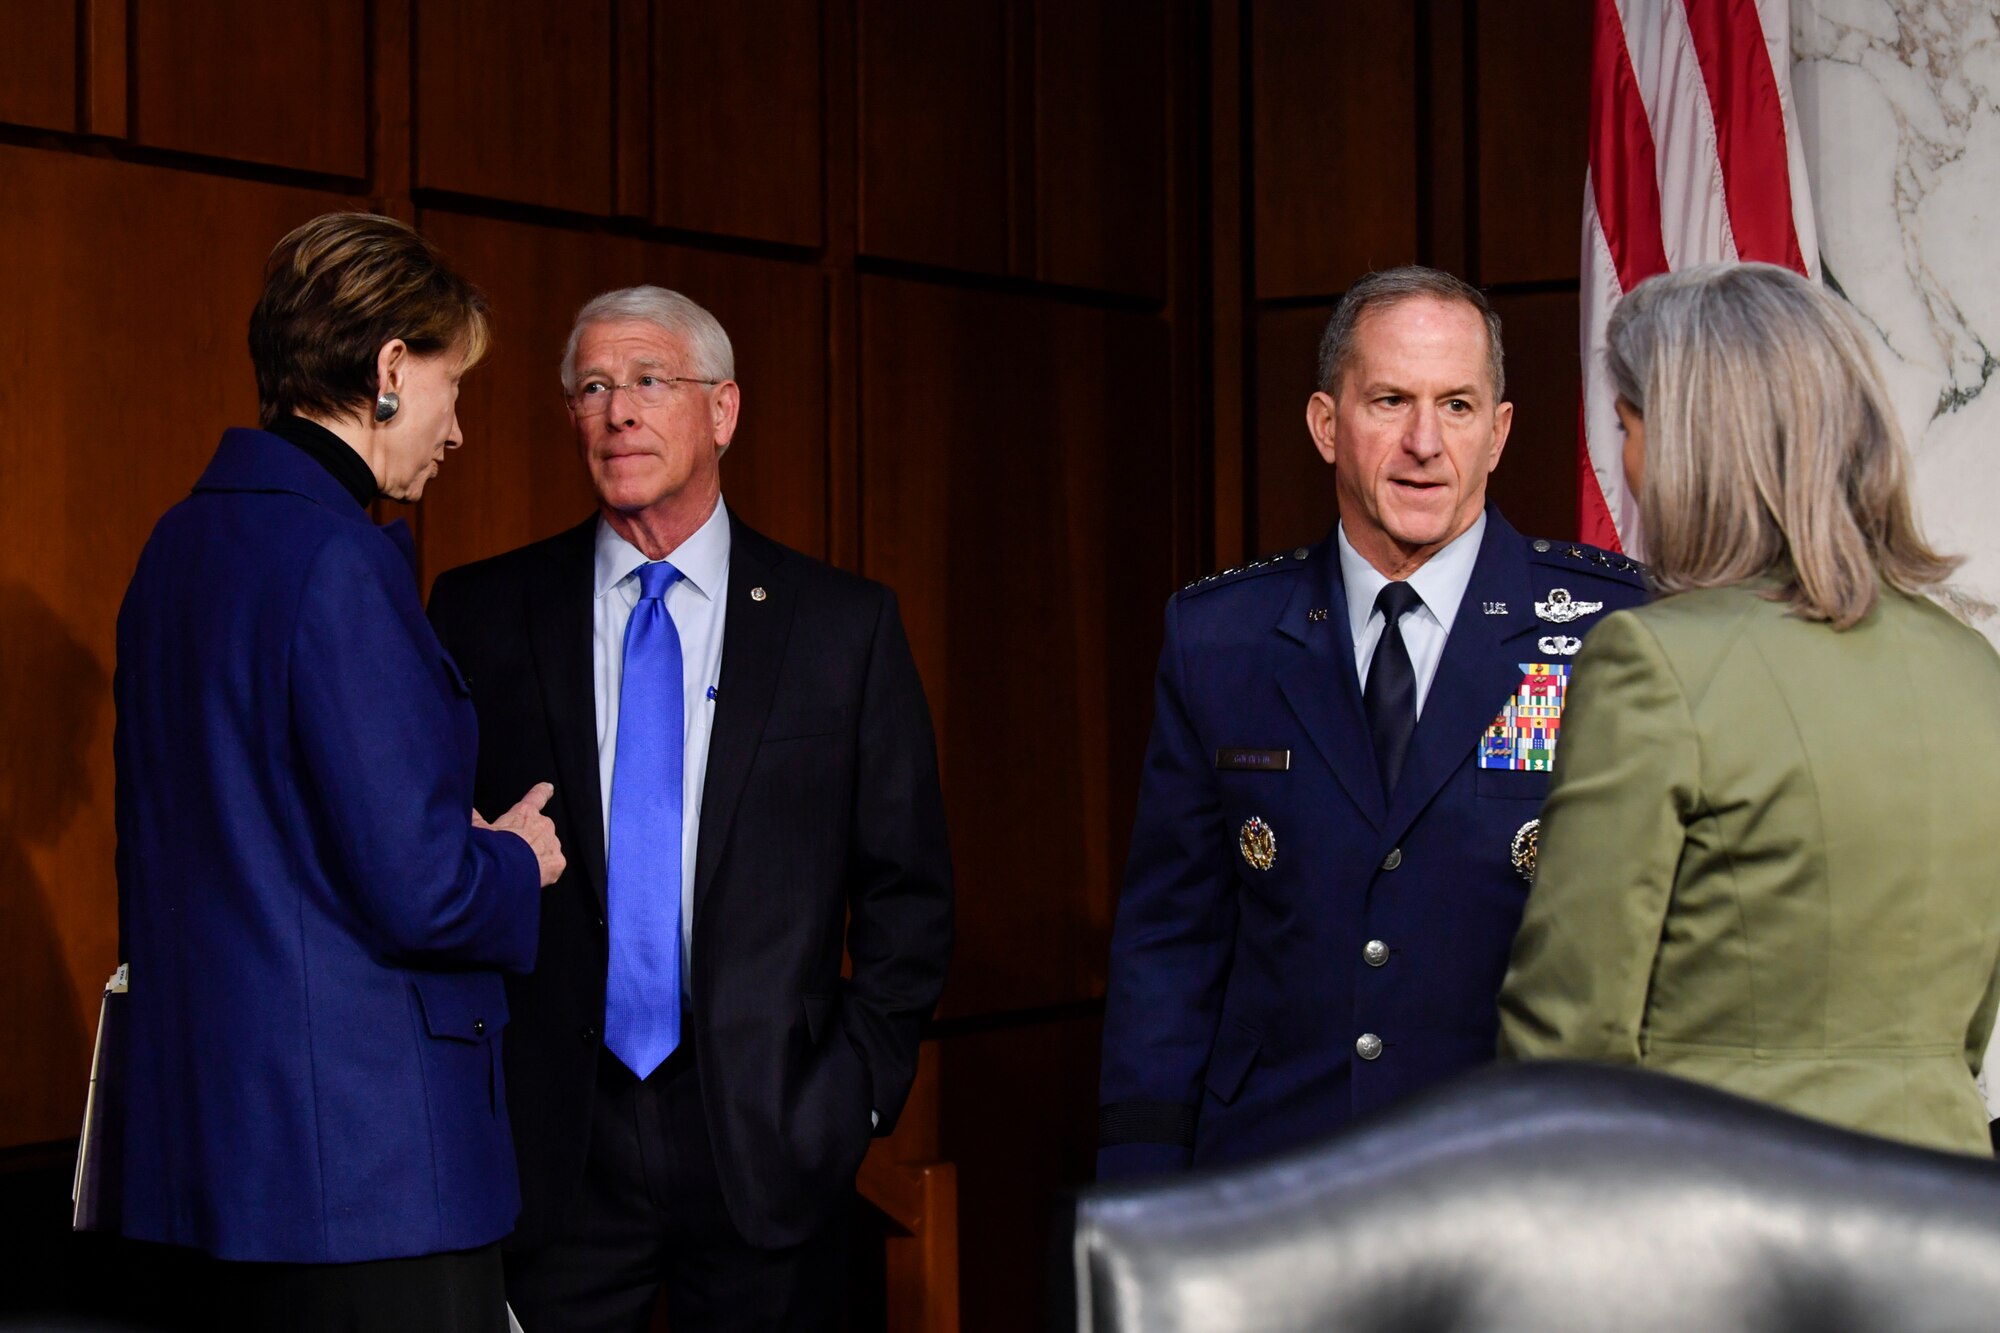 Air Force Secretary Barbara M. Barrett and Chief of Staff Gen. David L. Goldfein, second from right, speak with members of the Senate Armed Services Committee before testifying on the posture of the Air Force at the Hart Senate Office Building in Washington, D.C., March 3, 2020. (U.S. Air Force photo by Wayne Clark)